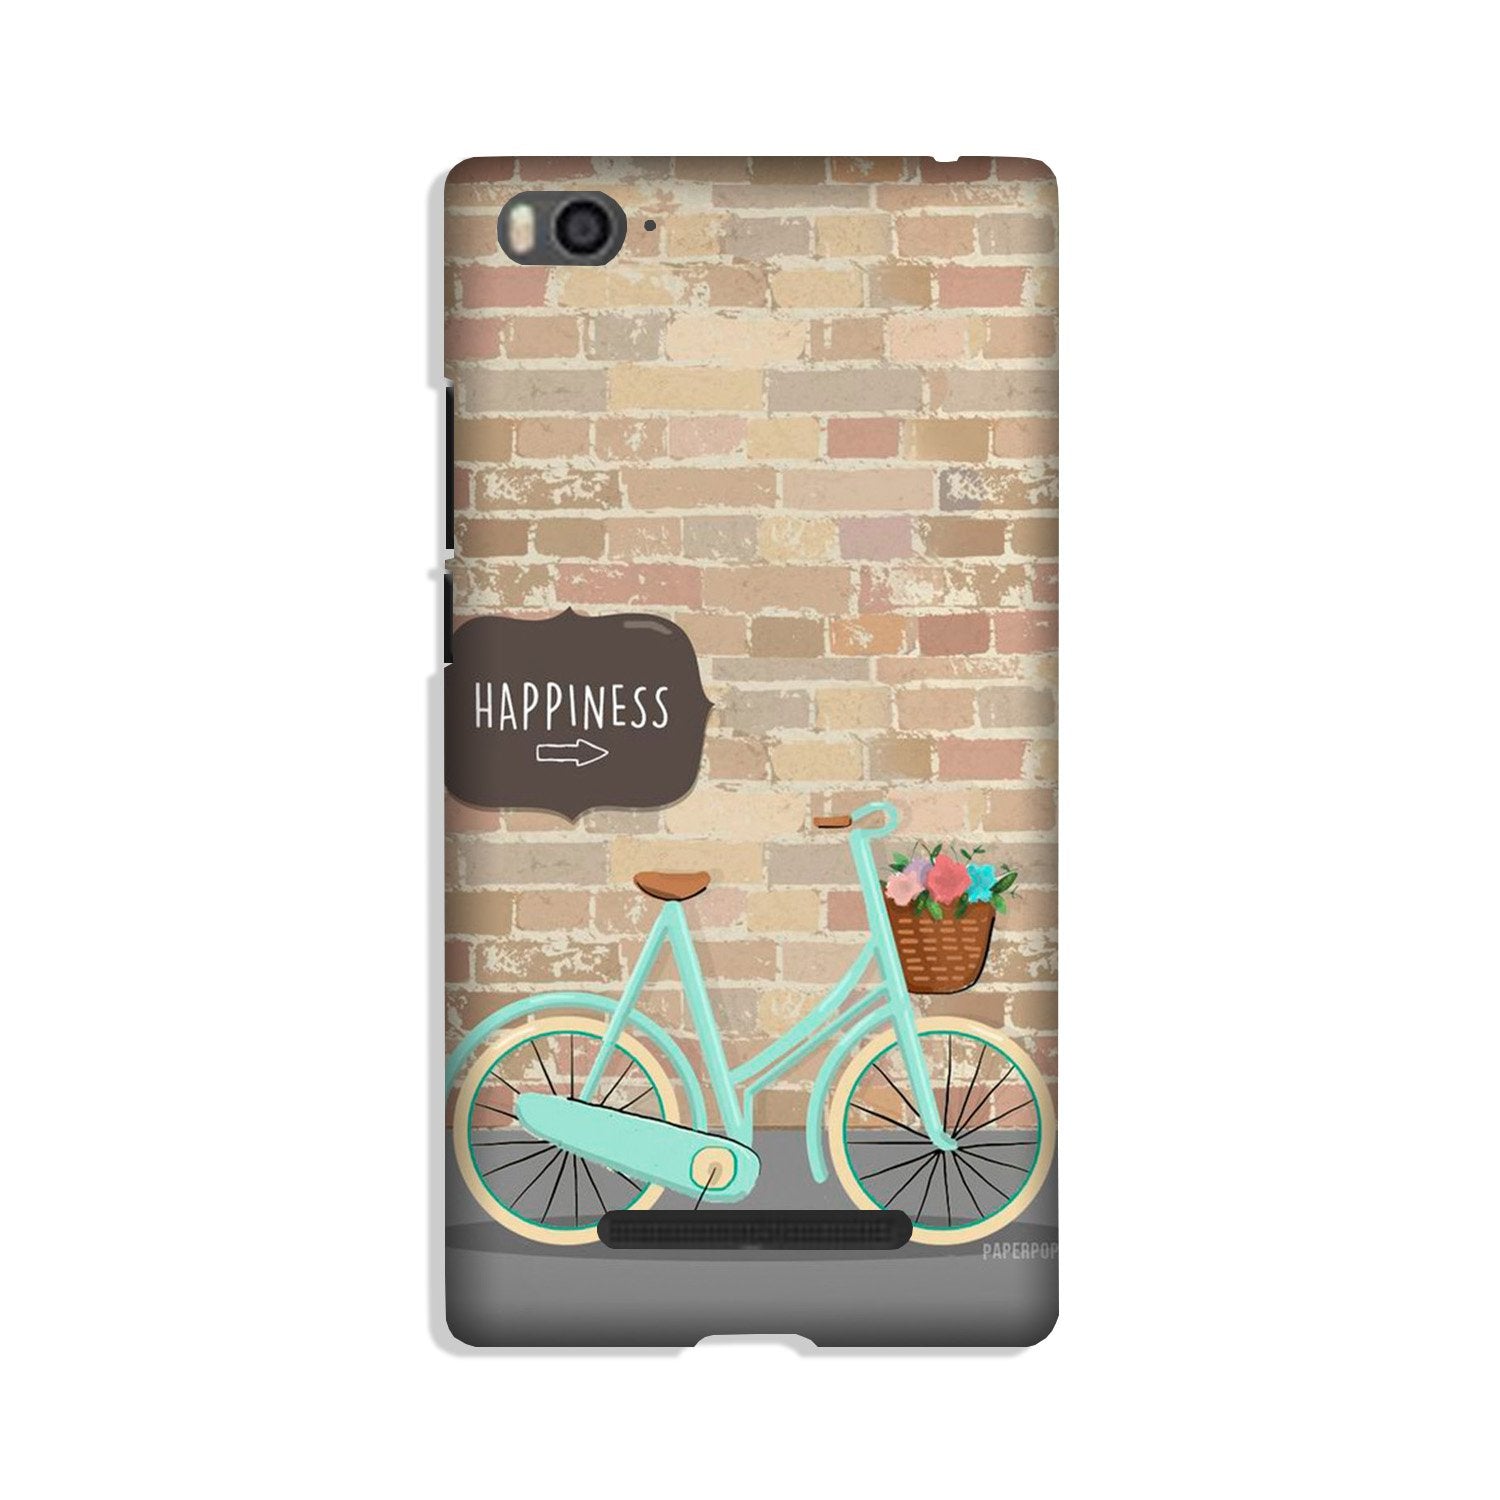 Happiness Case for Xiaomi Mi 4i